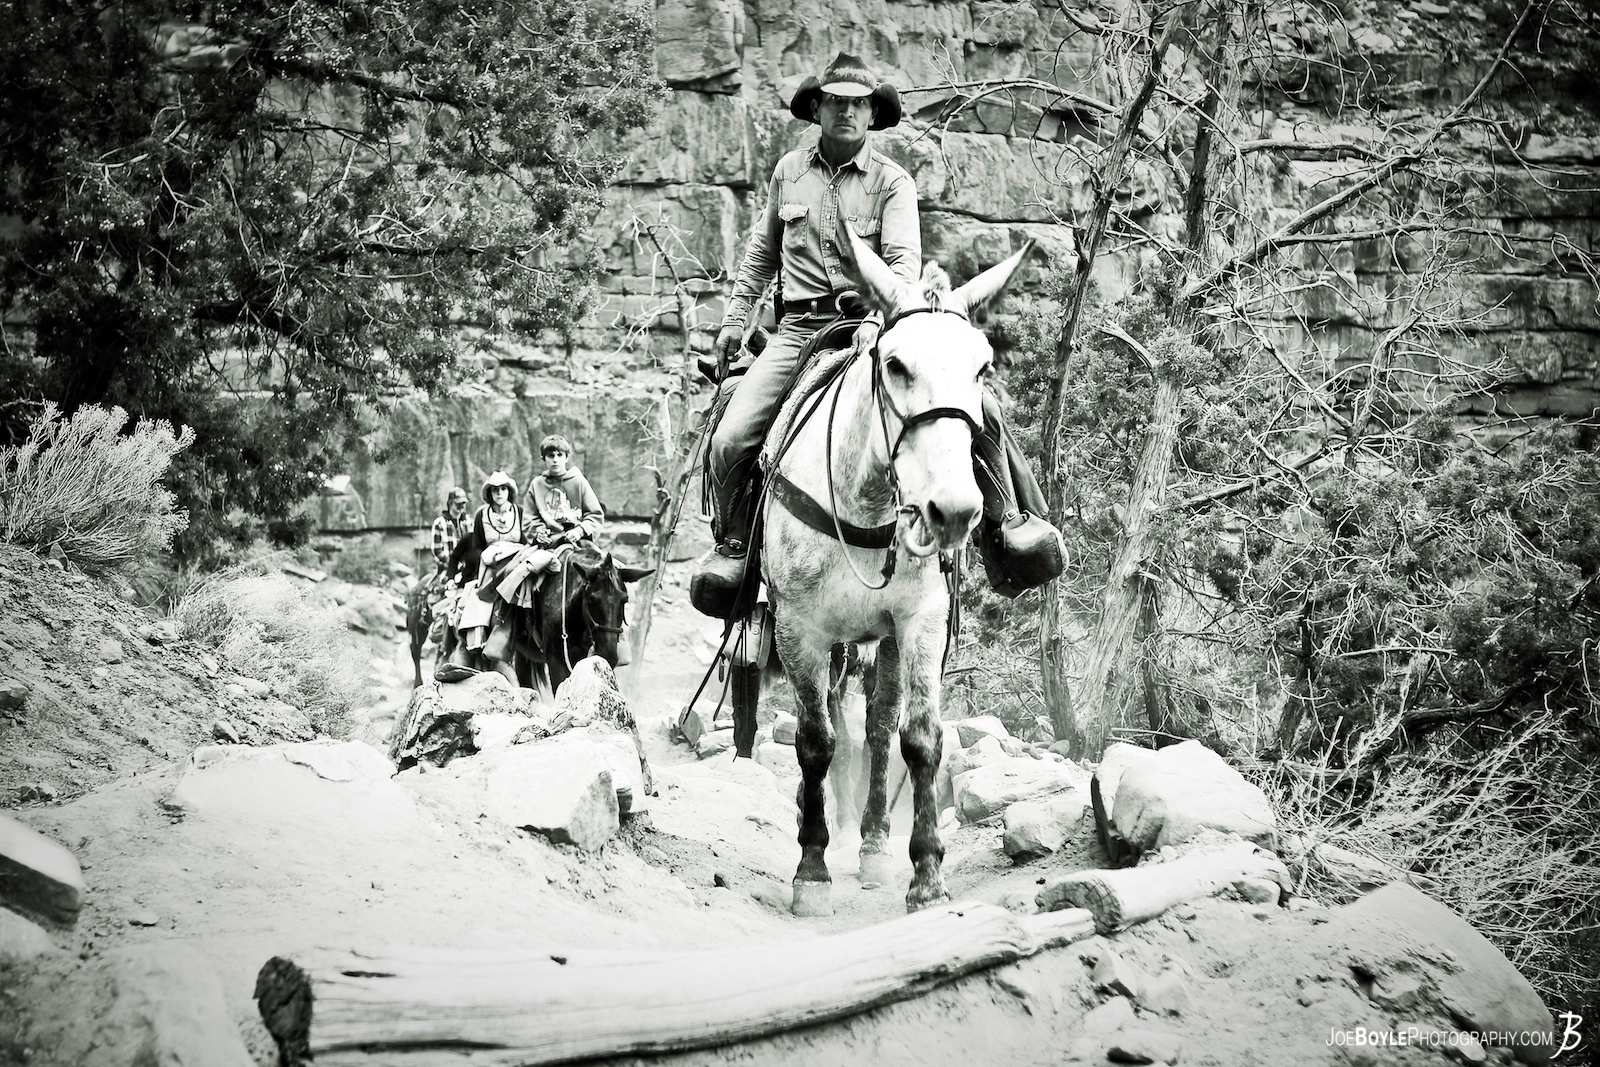  As I was hiking down Bright Angel Trail there were a few Mule Rides on the ascent - this was one of them. 